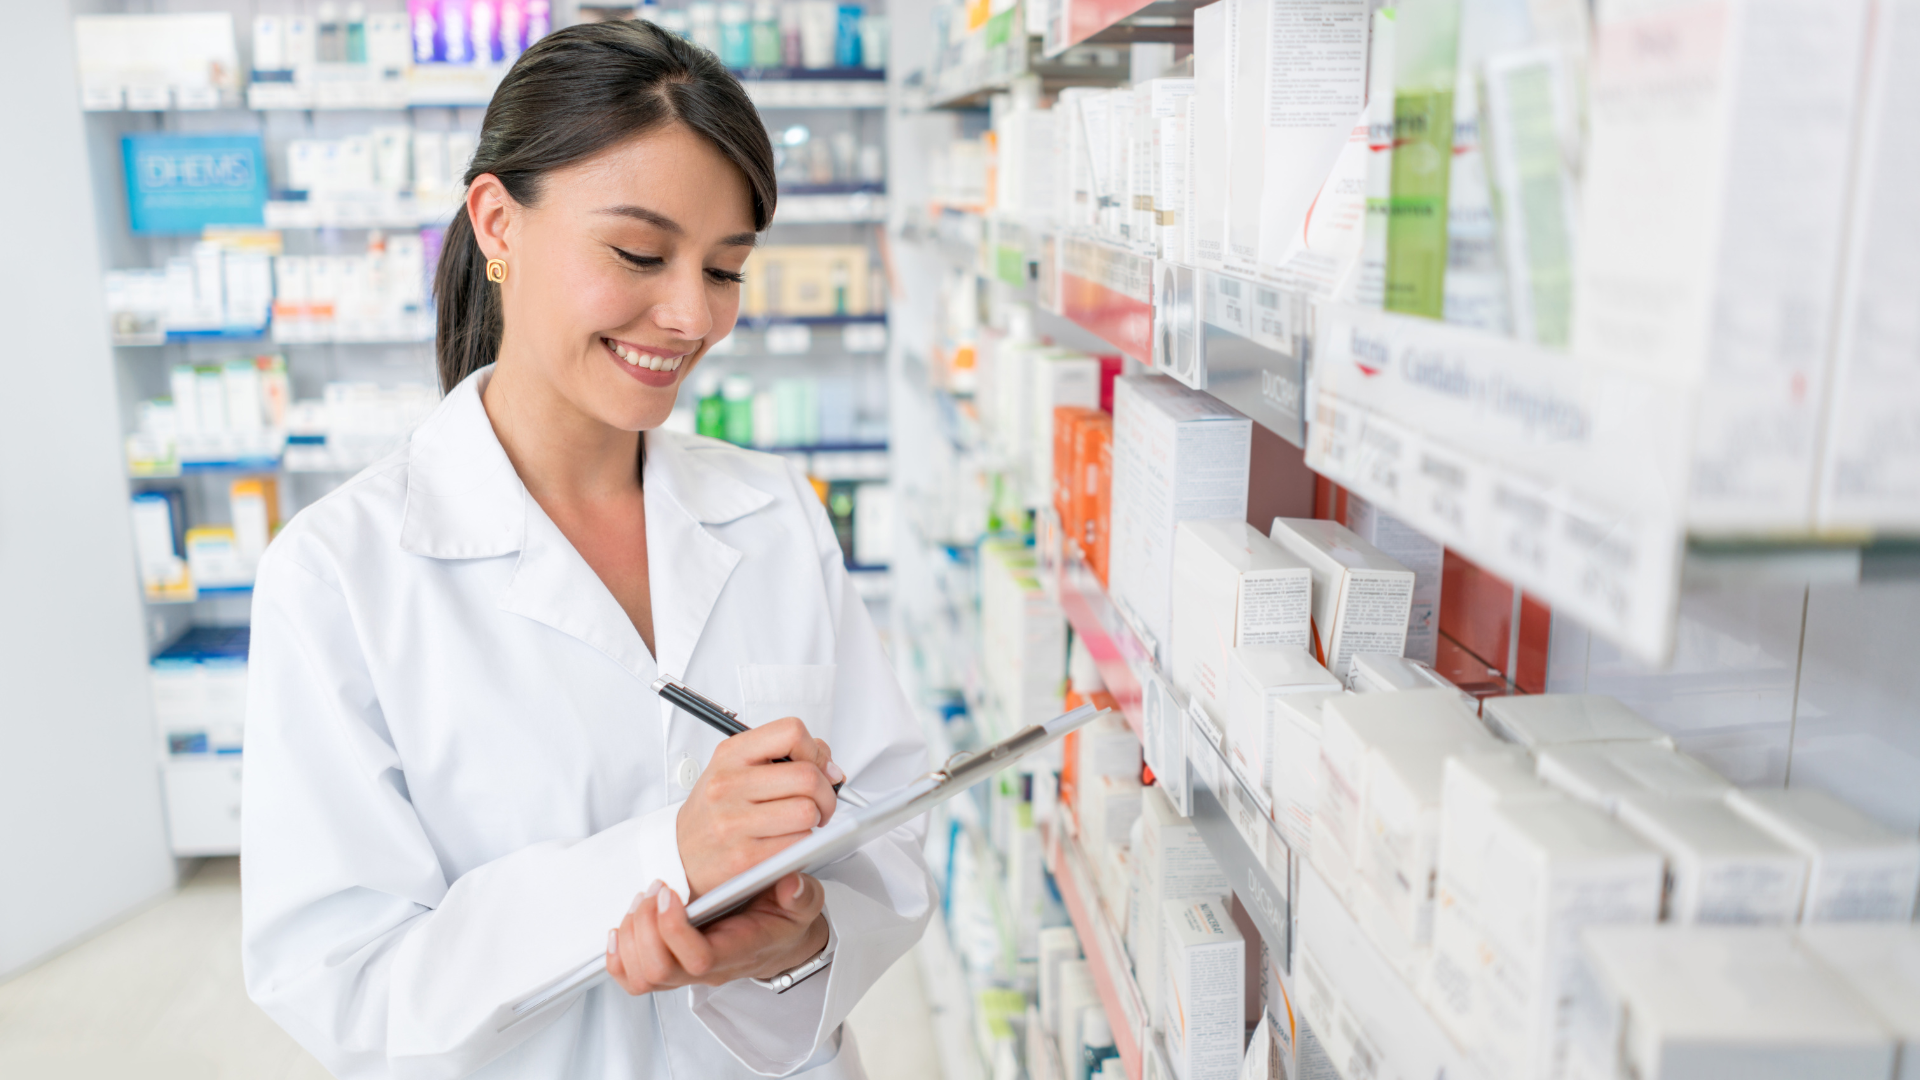 A smiling female pharmacist in a white lab coat is taking notes on a clipboard while standing in an aisle lined with various medical products and medications in a well-lit pharmacy.